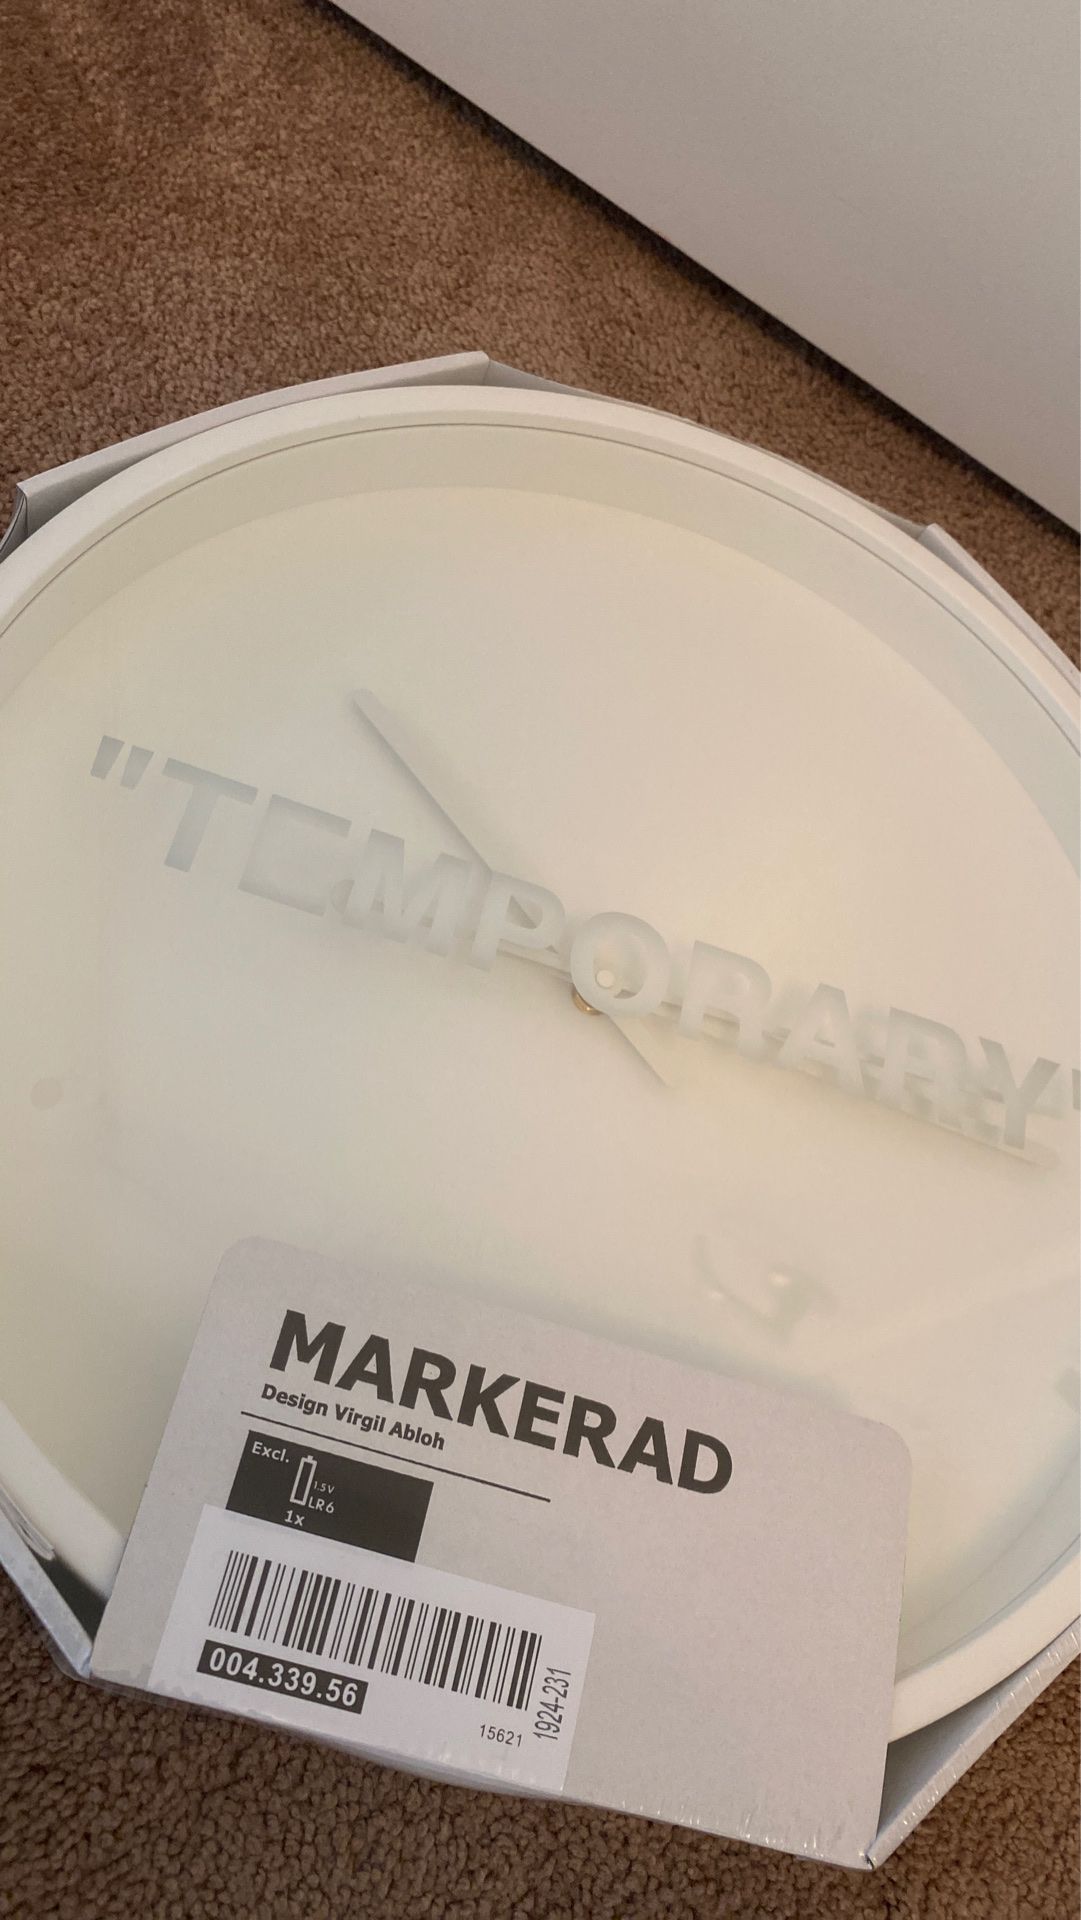 IKEA Virgil Abloh Temporary Clock for Sale in Los Angeles, CA